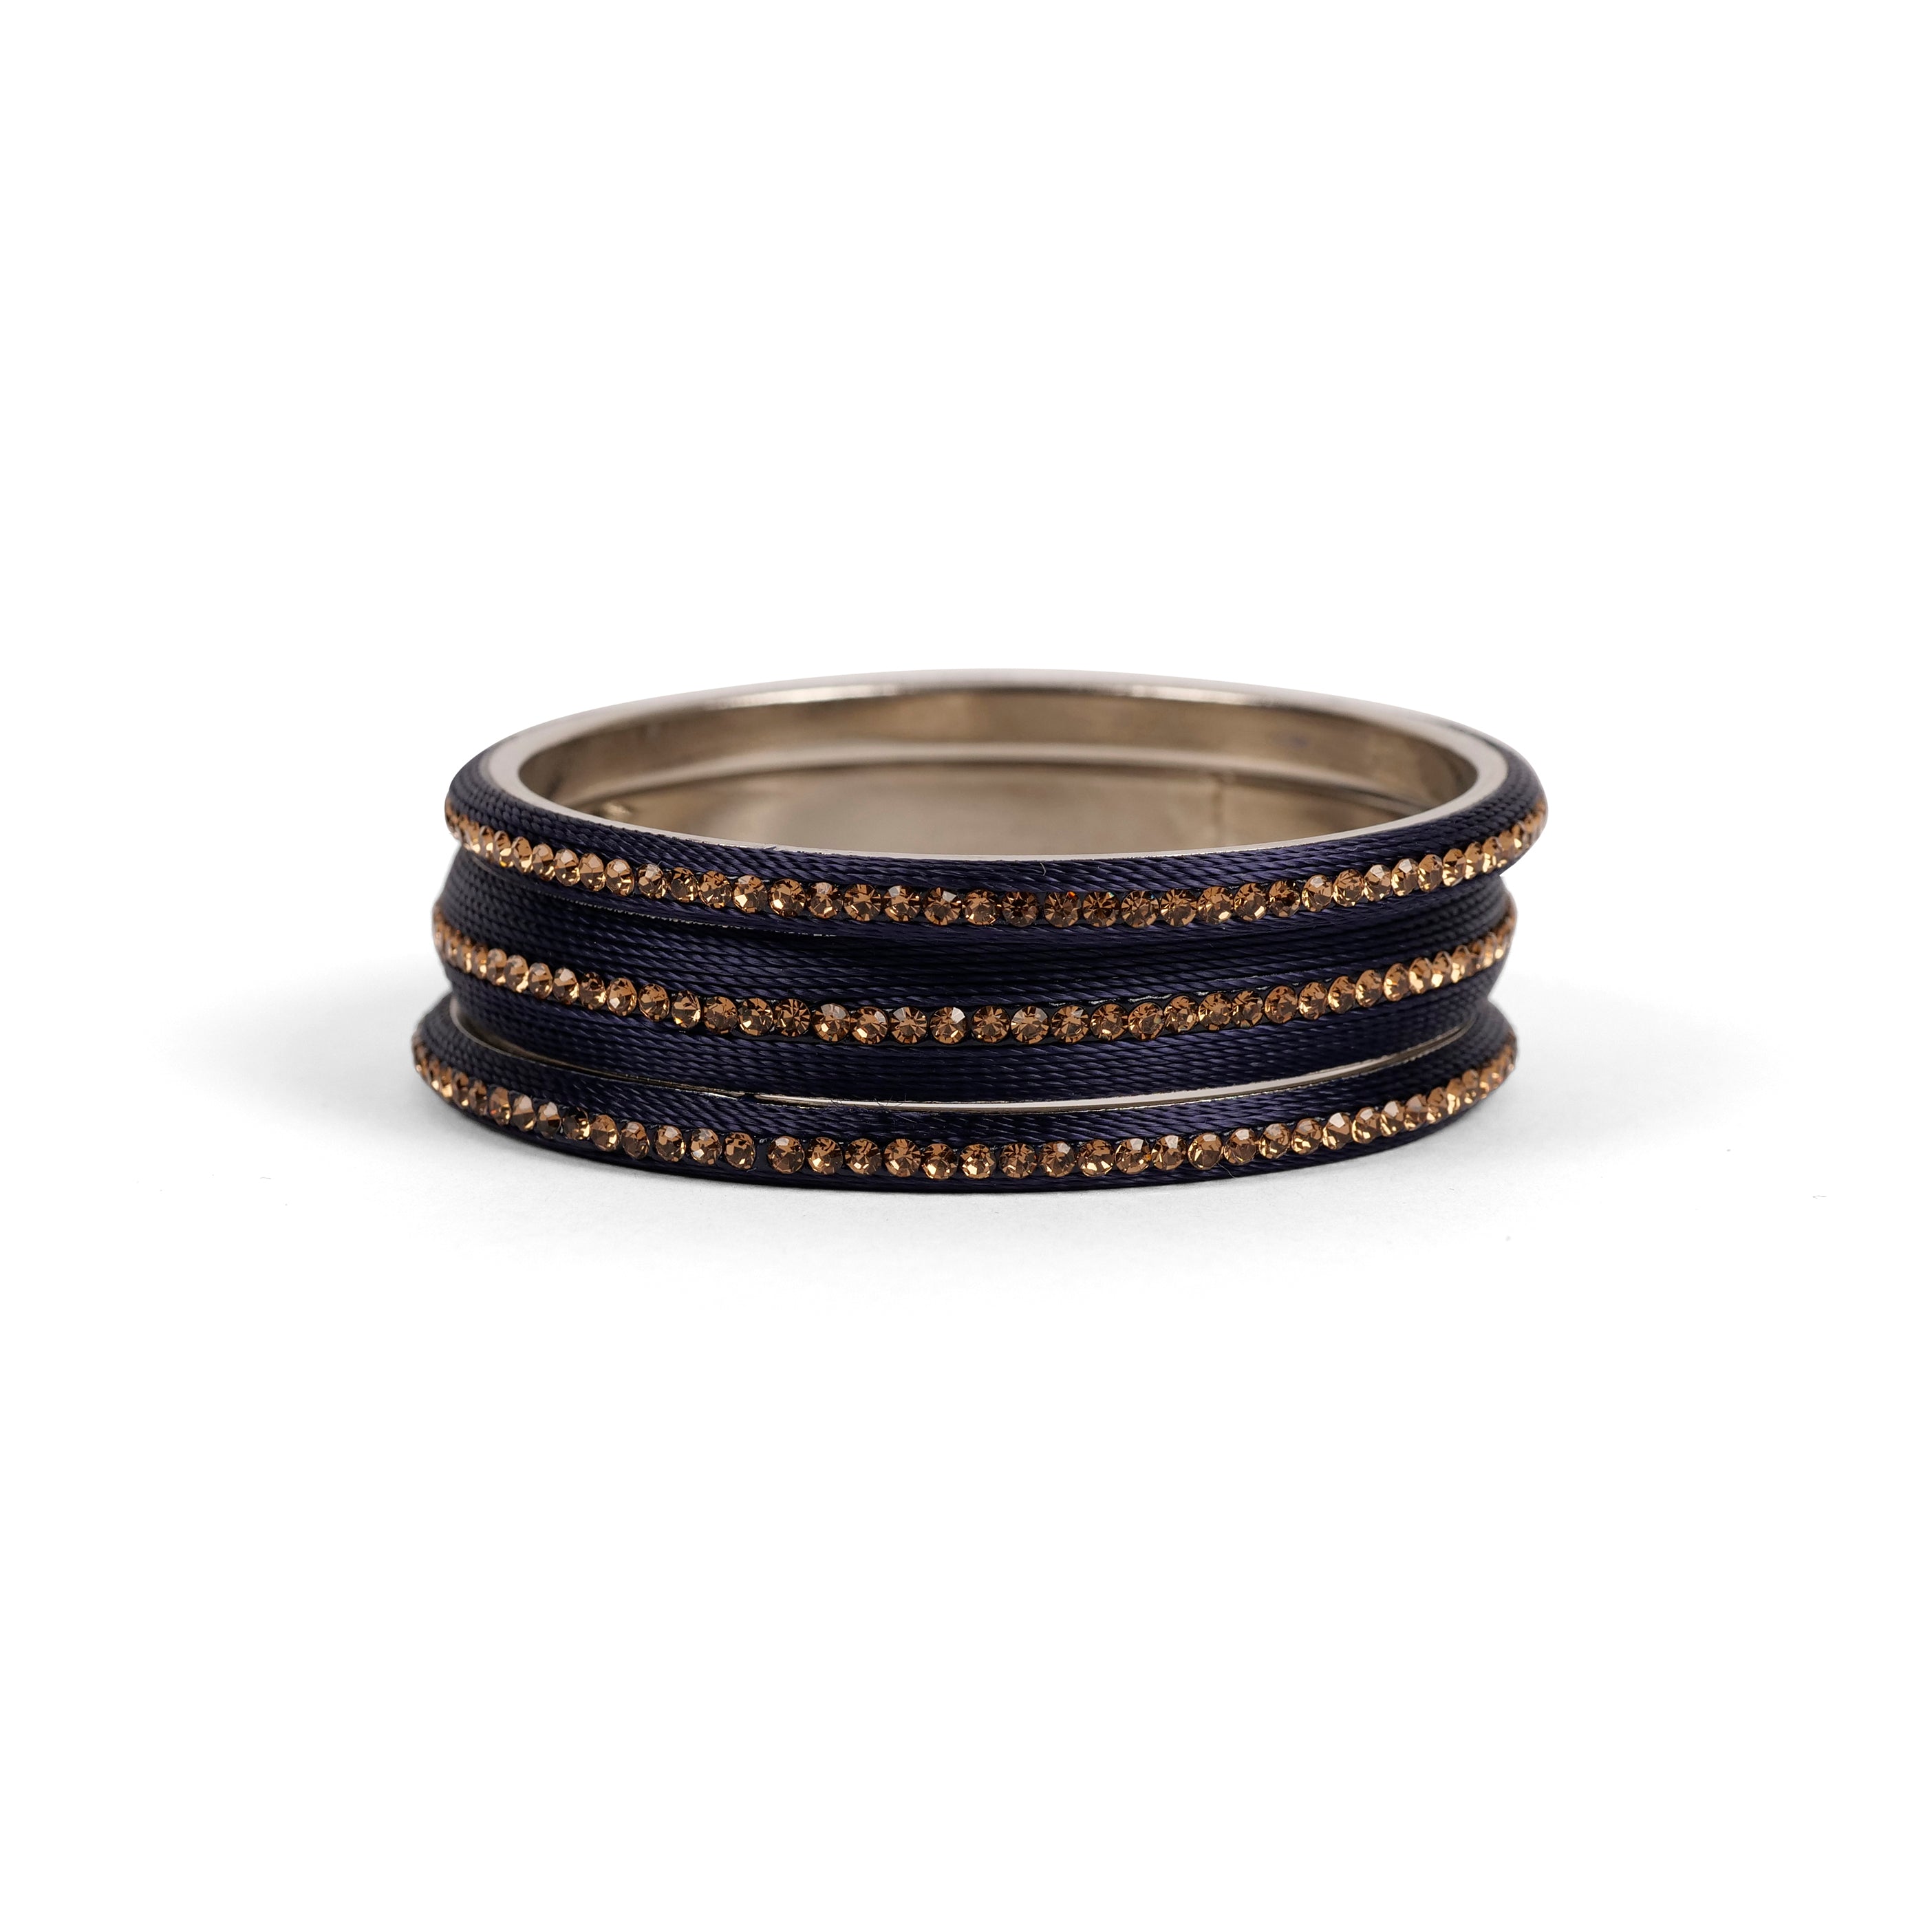 Set of 3 Thread Bangles in Navy Blue